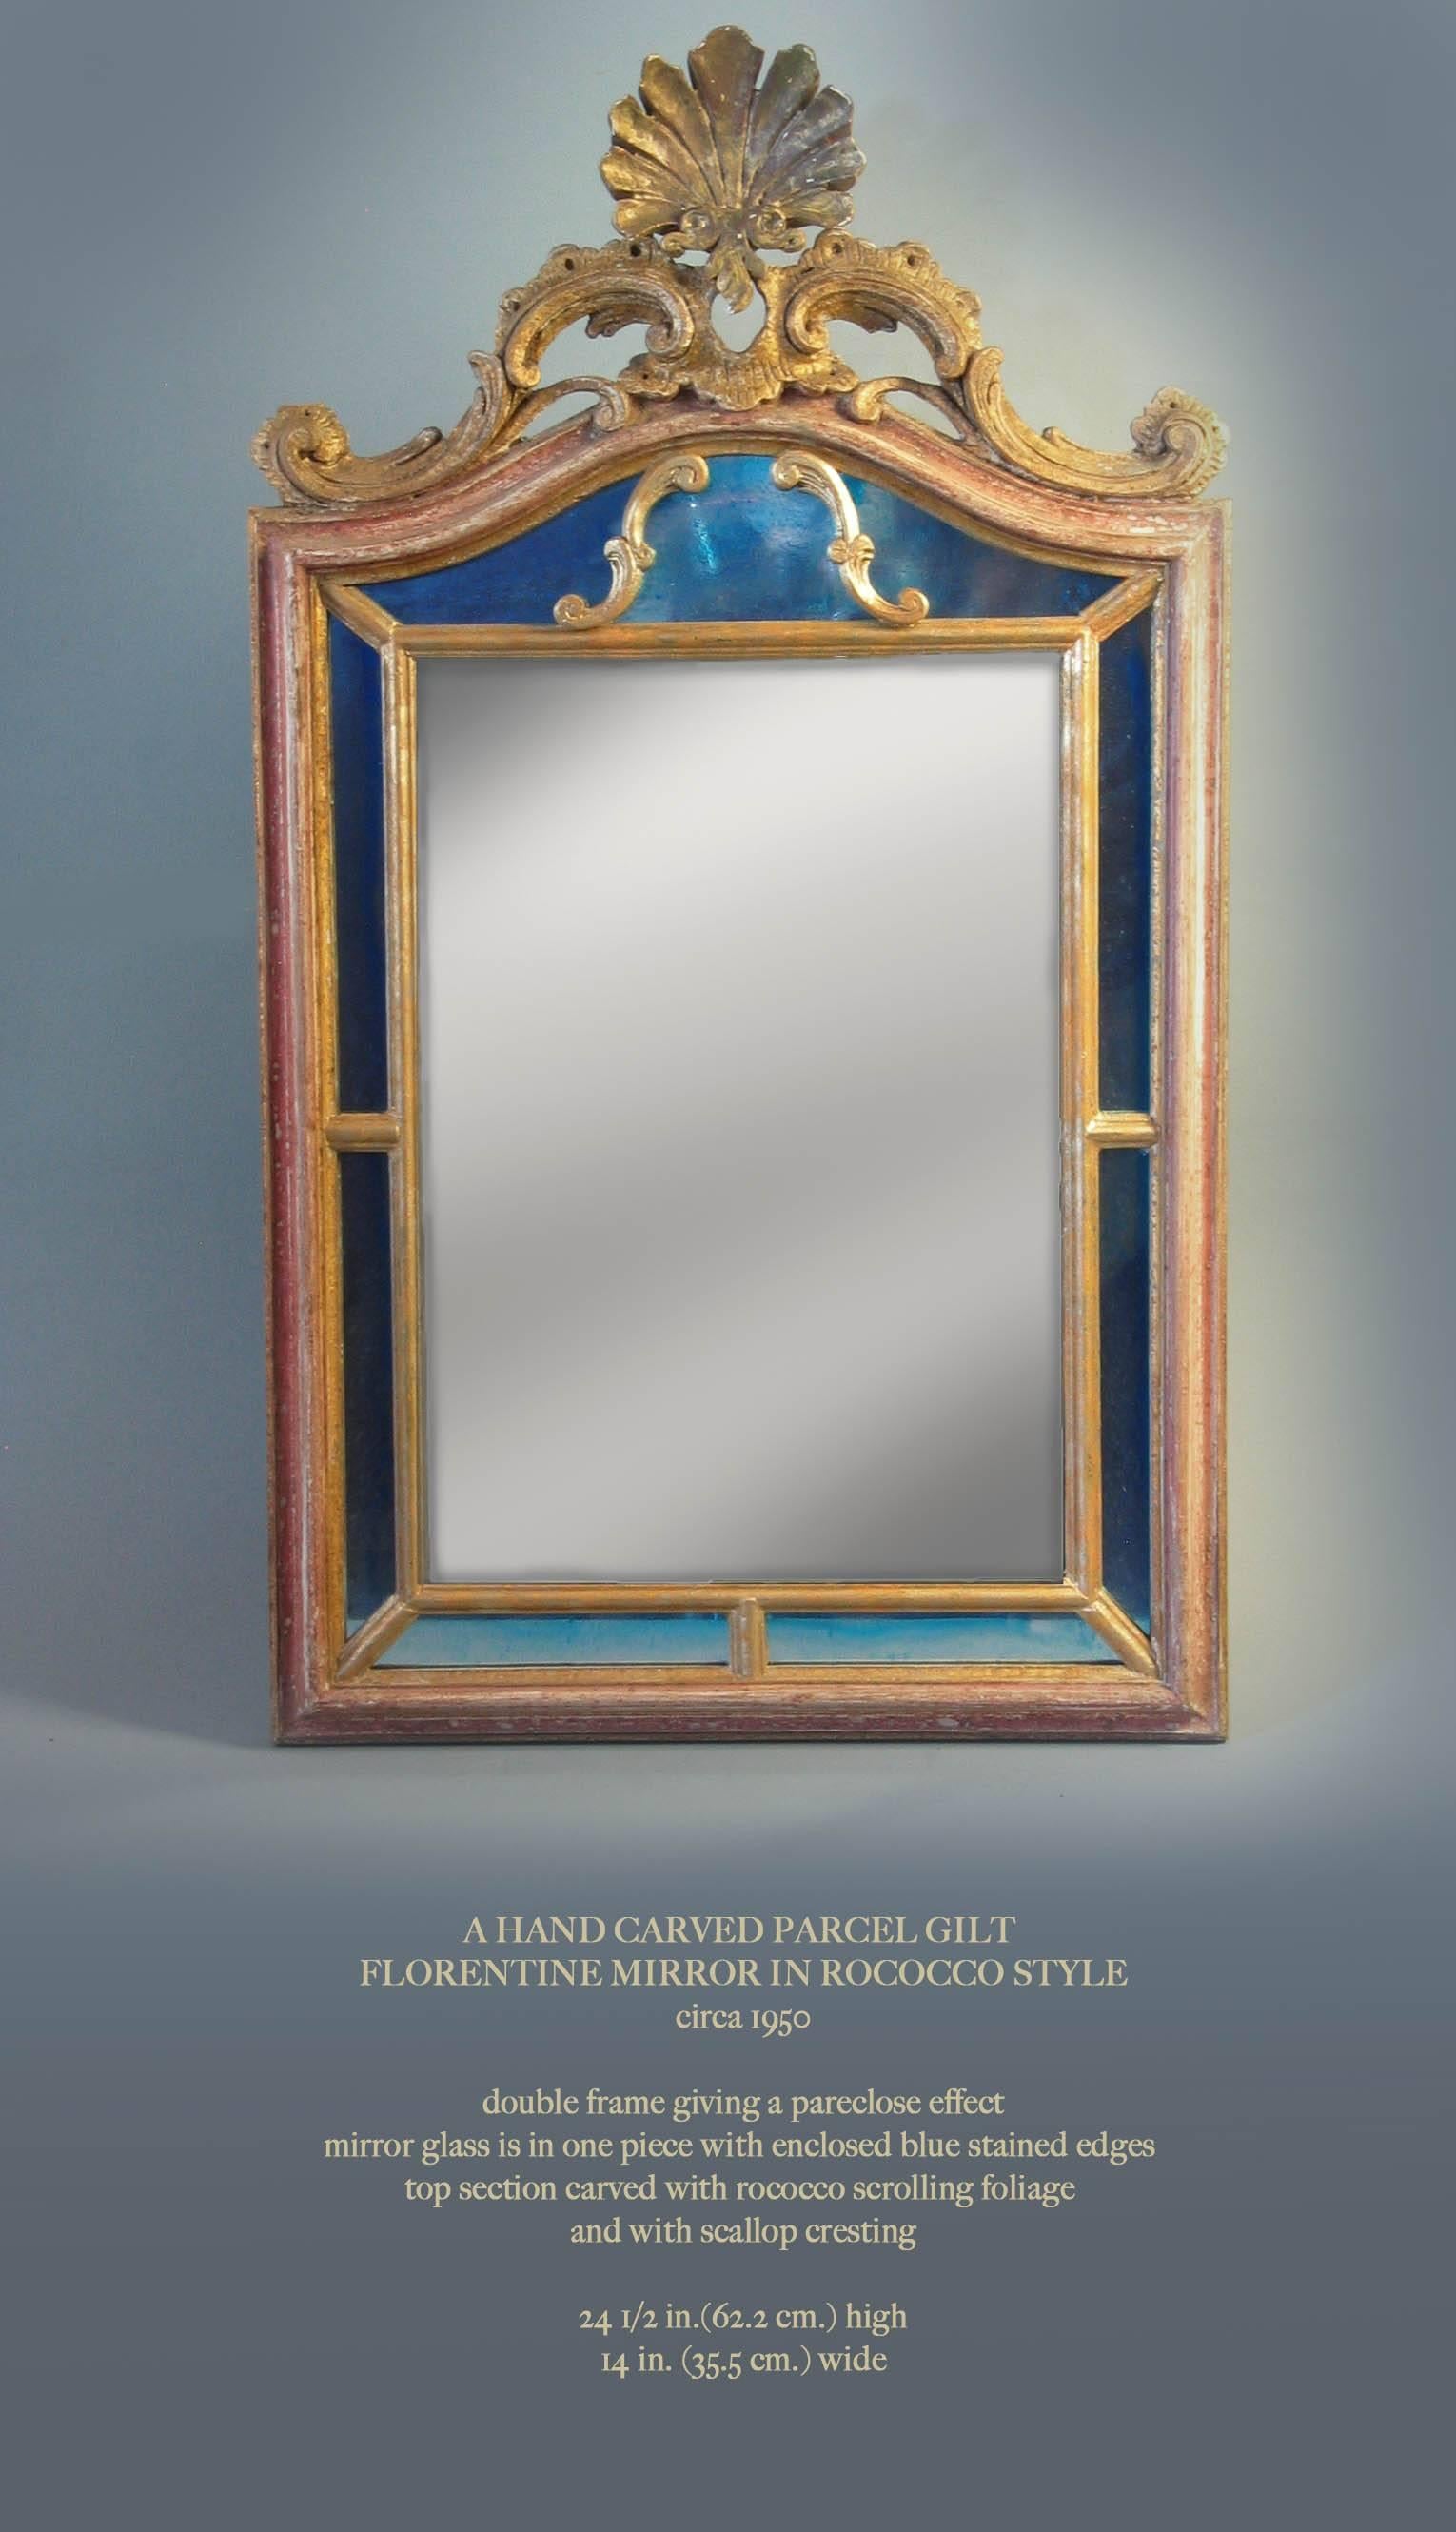 A hand-carved parcel-gilt Florentine mirror in Rococo style (Circa 1950), Double frame giving a pare close effect mirror glass is in one piece with enclosed blue stained edges, top section is carved with Rococo scrolling foliage and scallop